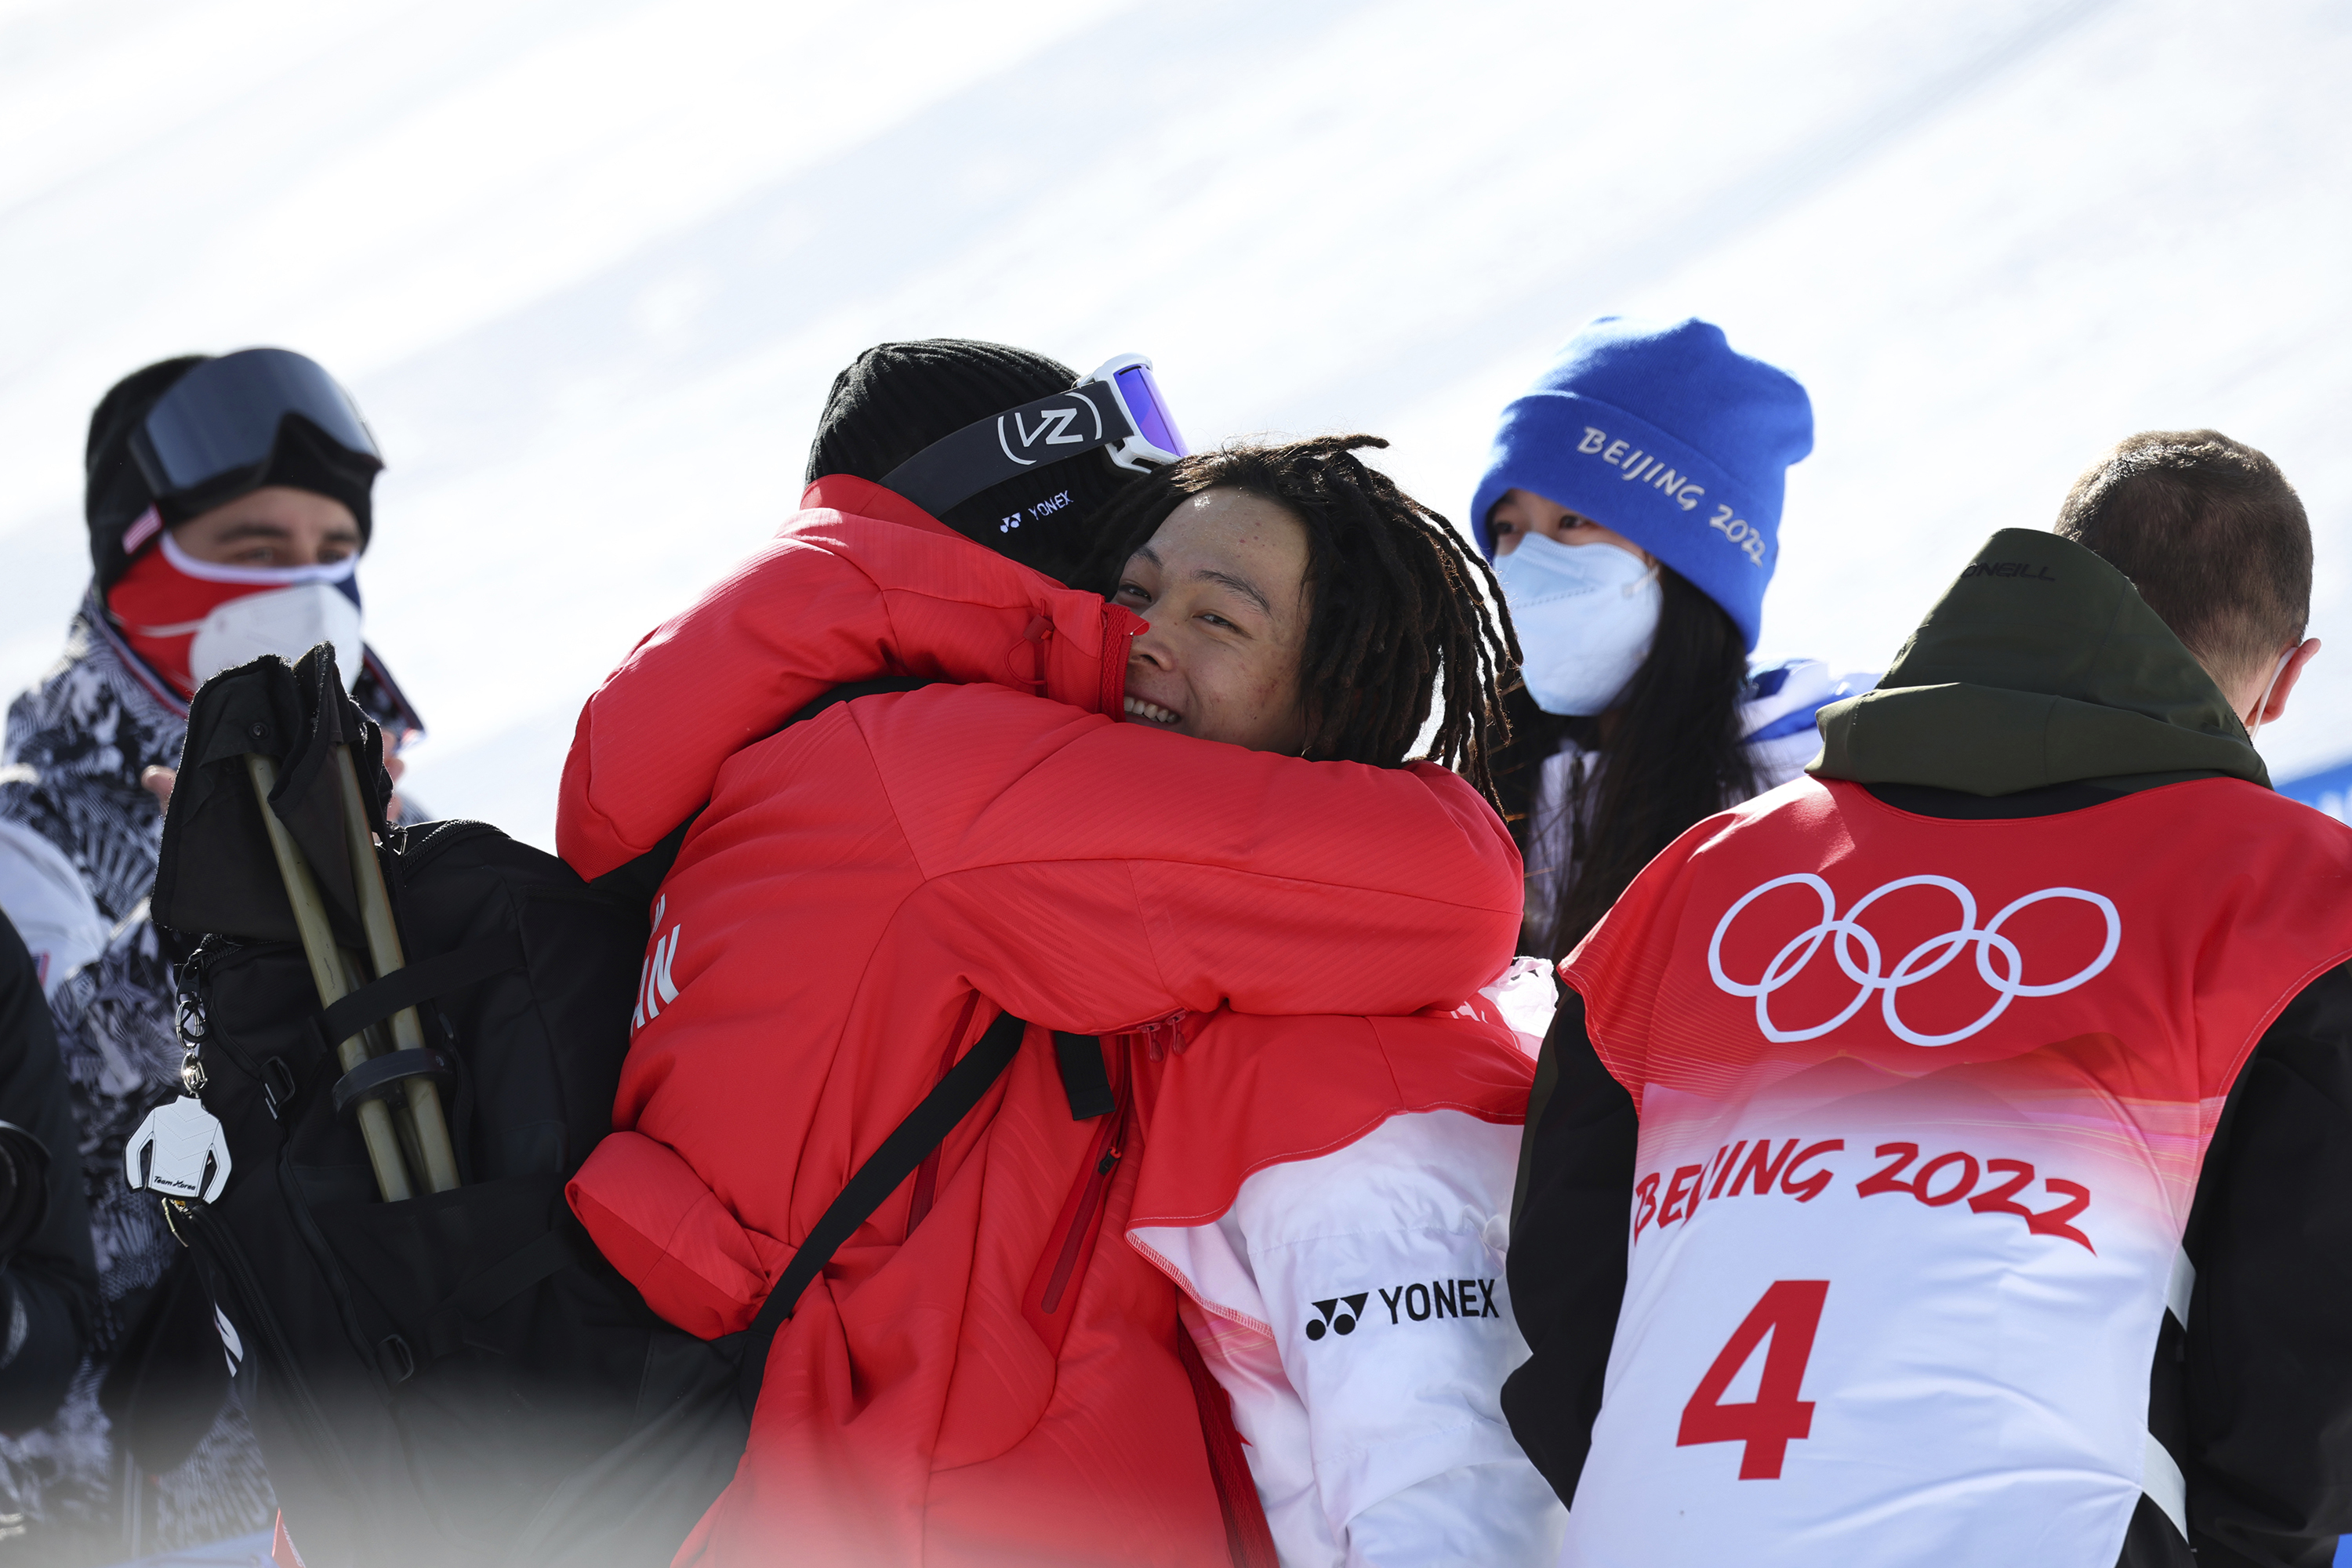 Shaun White and Ayumu Hirano hug each other after the snowboard halfpipe final on Friday.